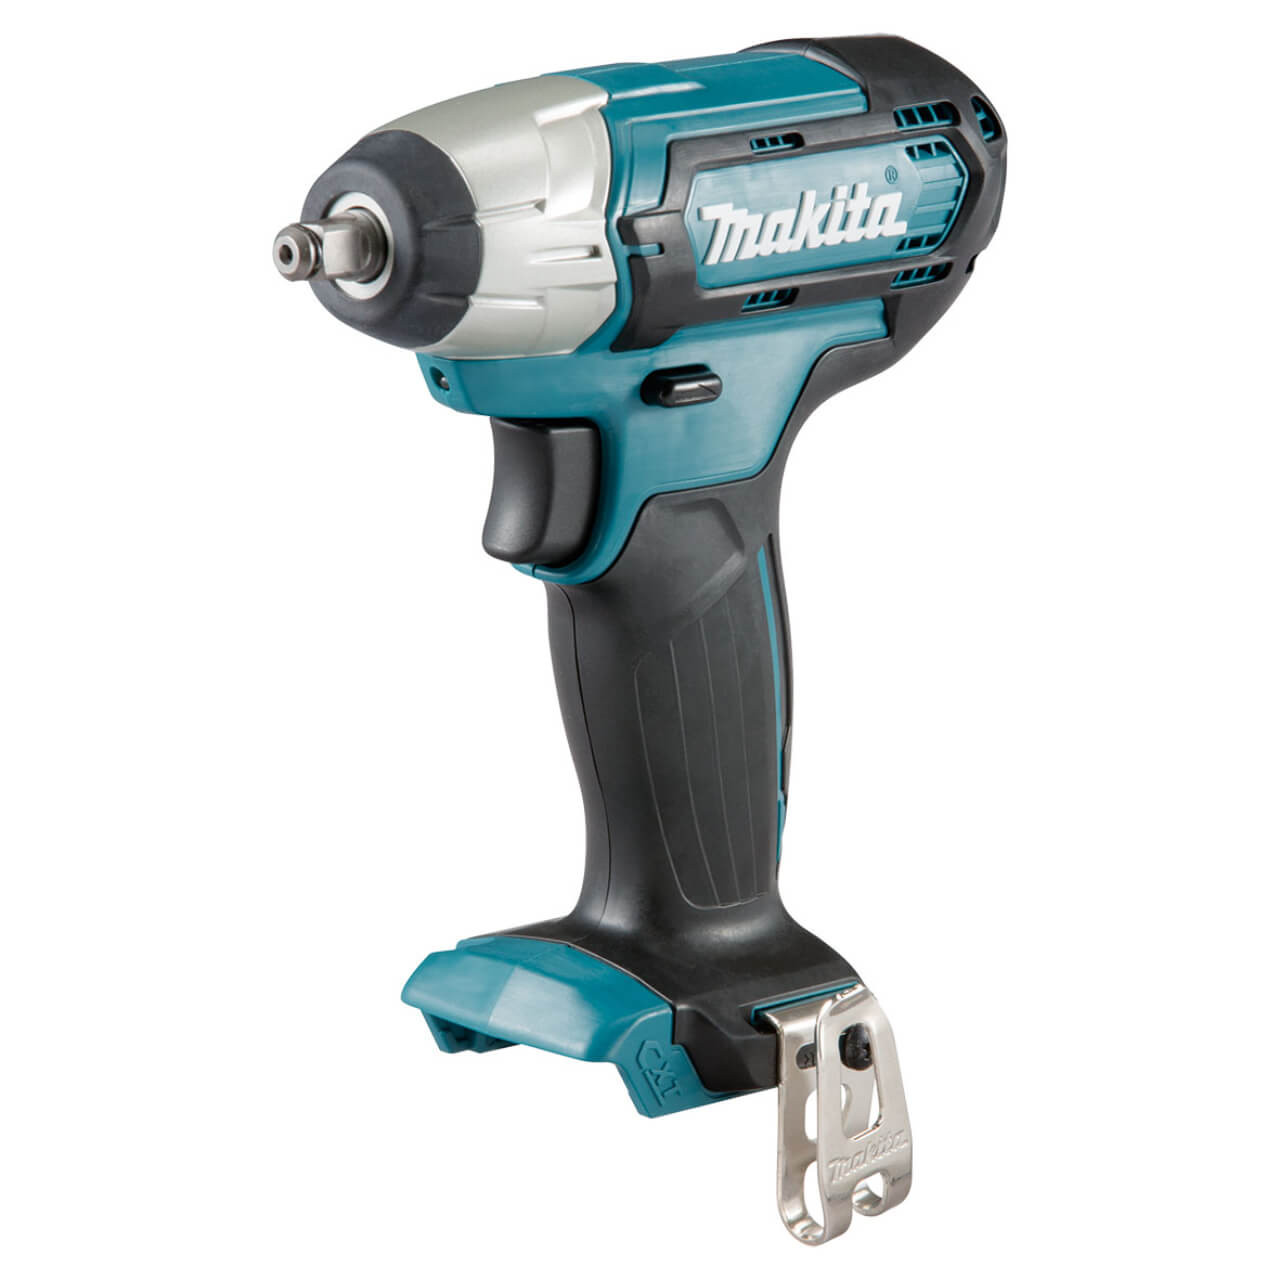 Makita 12V Max 3/8” Impact Wrench Kit - Includes 2 x 1.5Ah Batteries & Charger